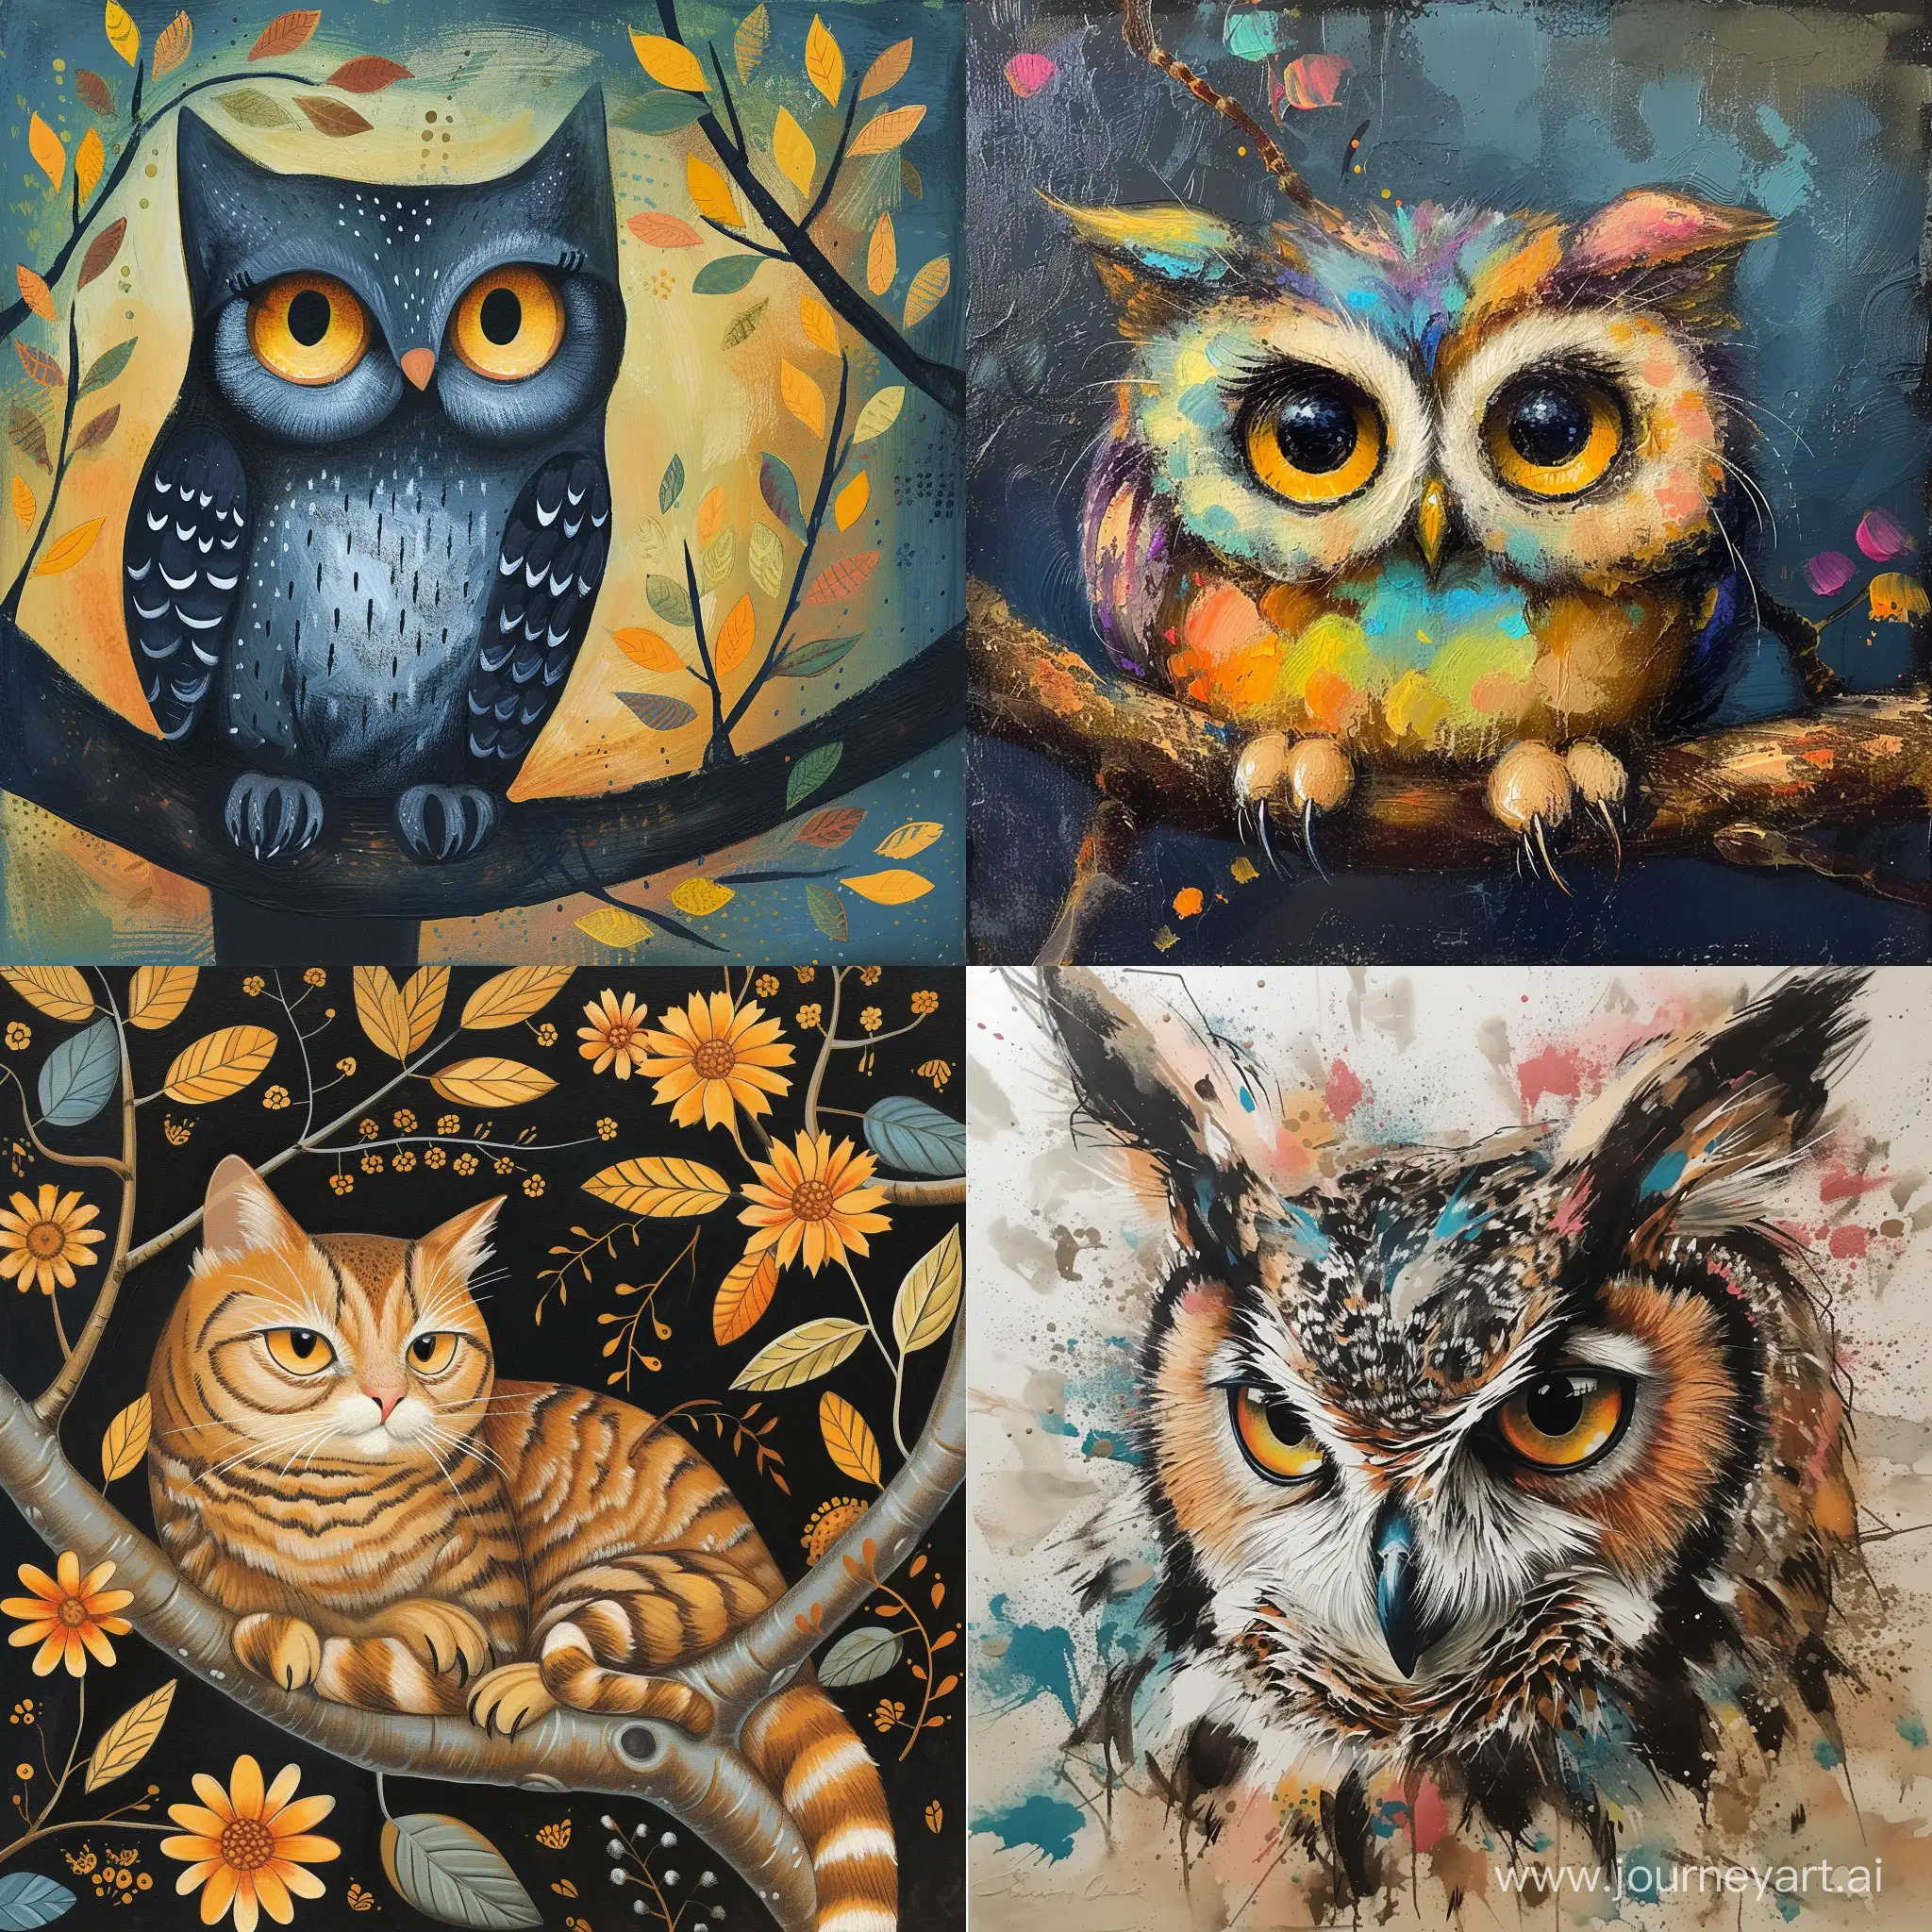 Enchanting-Owl-Cat-Art-Whimsical-Creation-with-Version-6-and-11-Aspect-Ratio